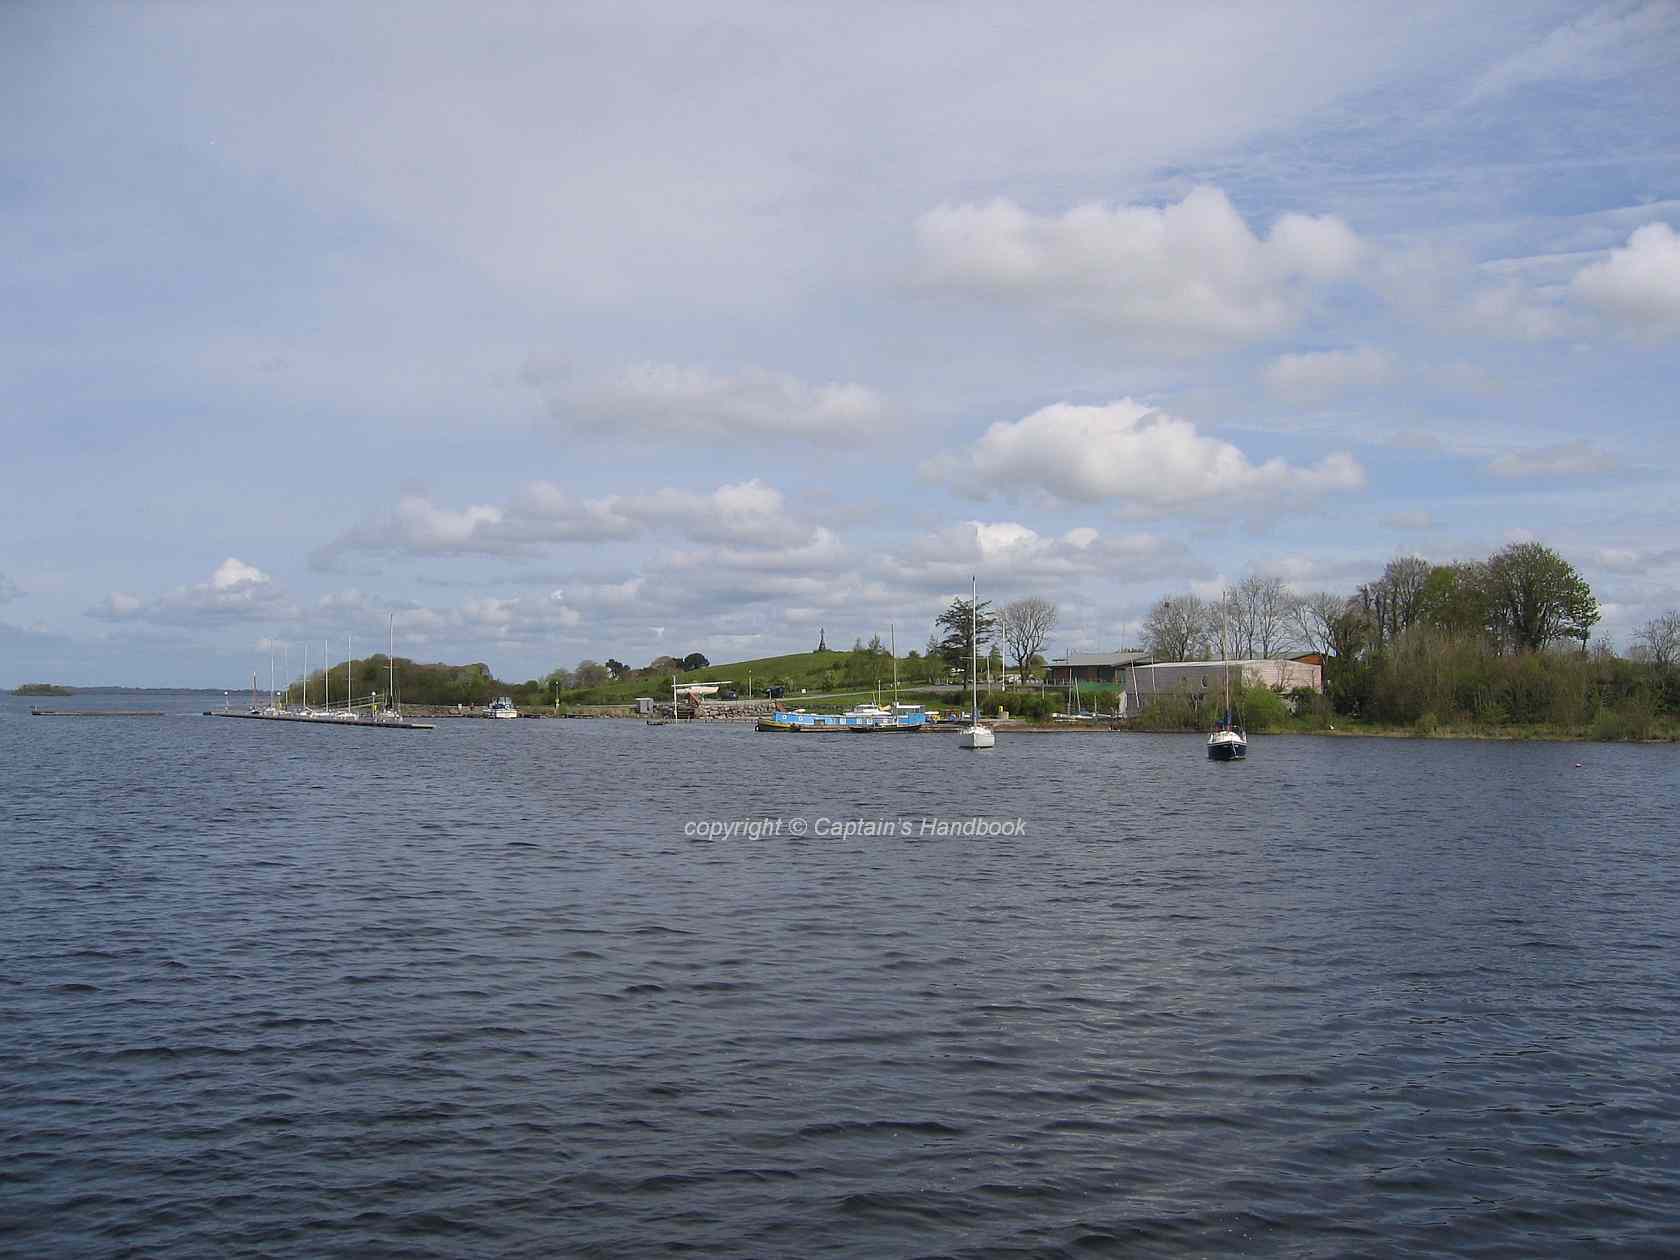 Lough Ree Yacht Club © Captain’s Handbook; click picture to "enlarge"